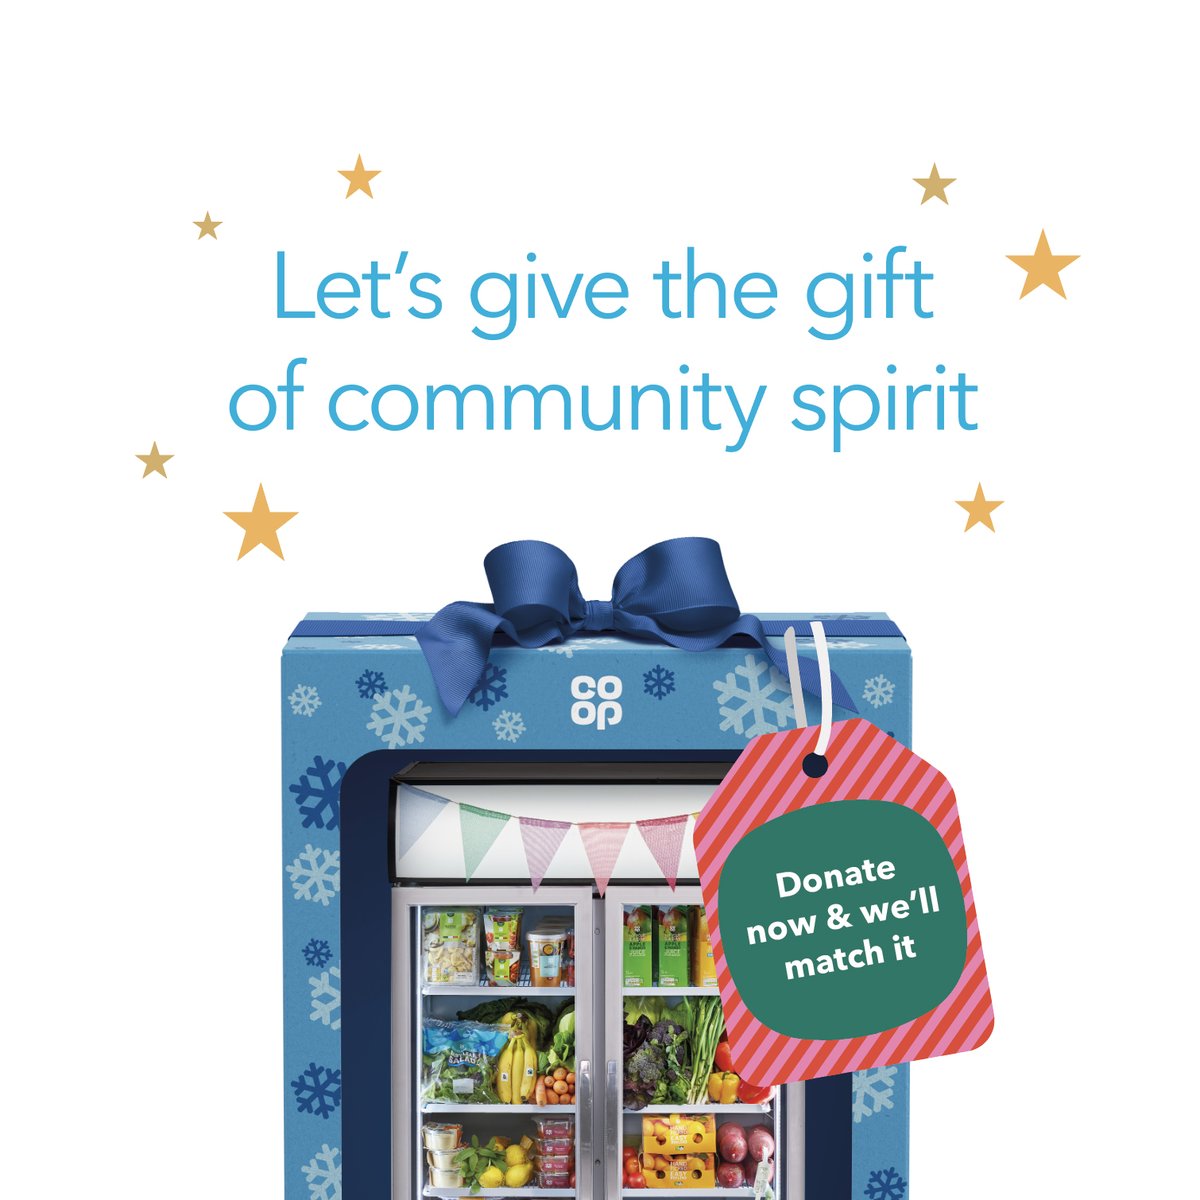 December has arrived! This Christmas @coopuk are doing things a little differently 🎁🎄 Donate to the Co-op Local Community Fund and we'll match your donation, to help support causes across the UK to get the things they really need. Find out more at coop.co.uk/givethegift